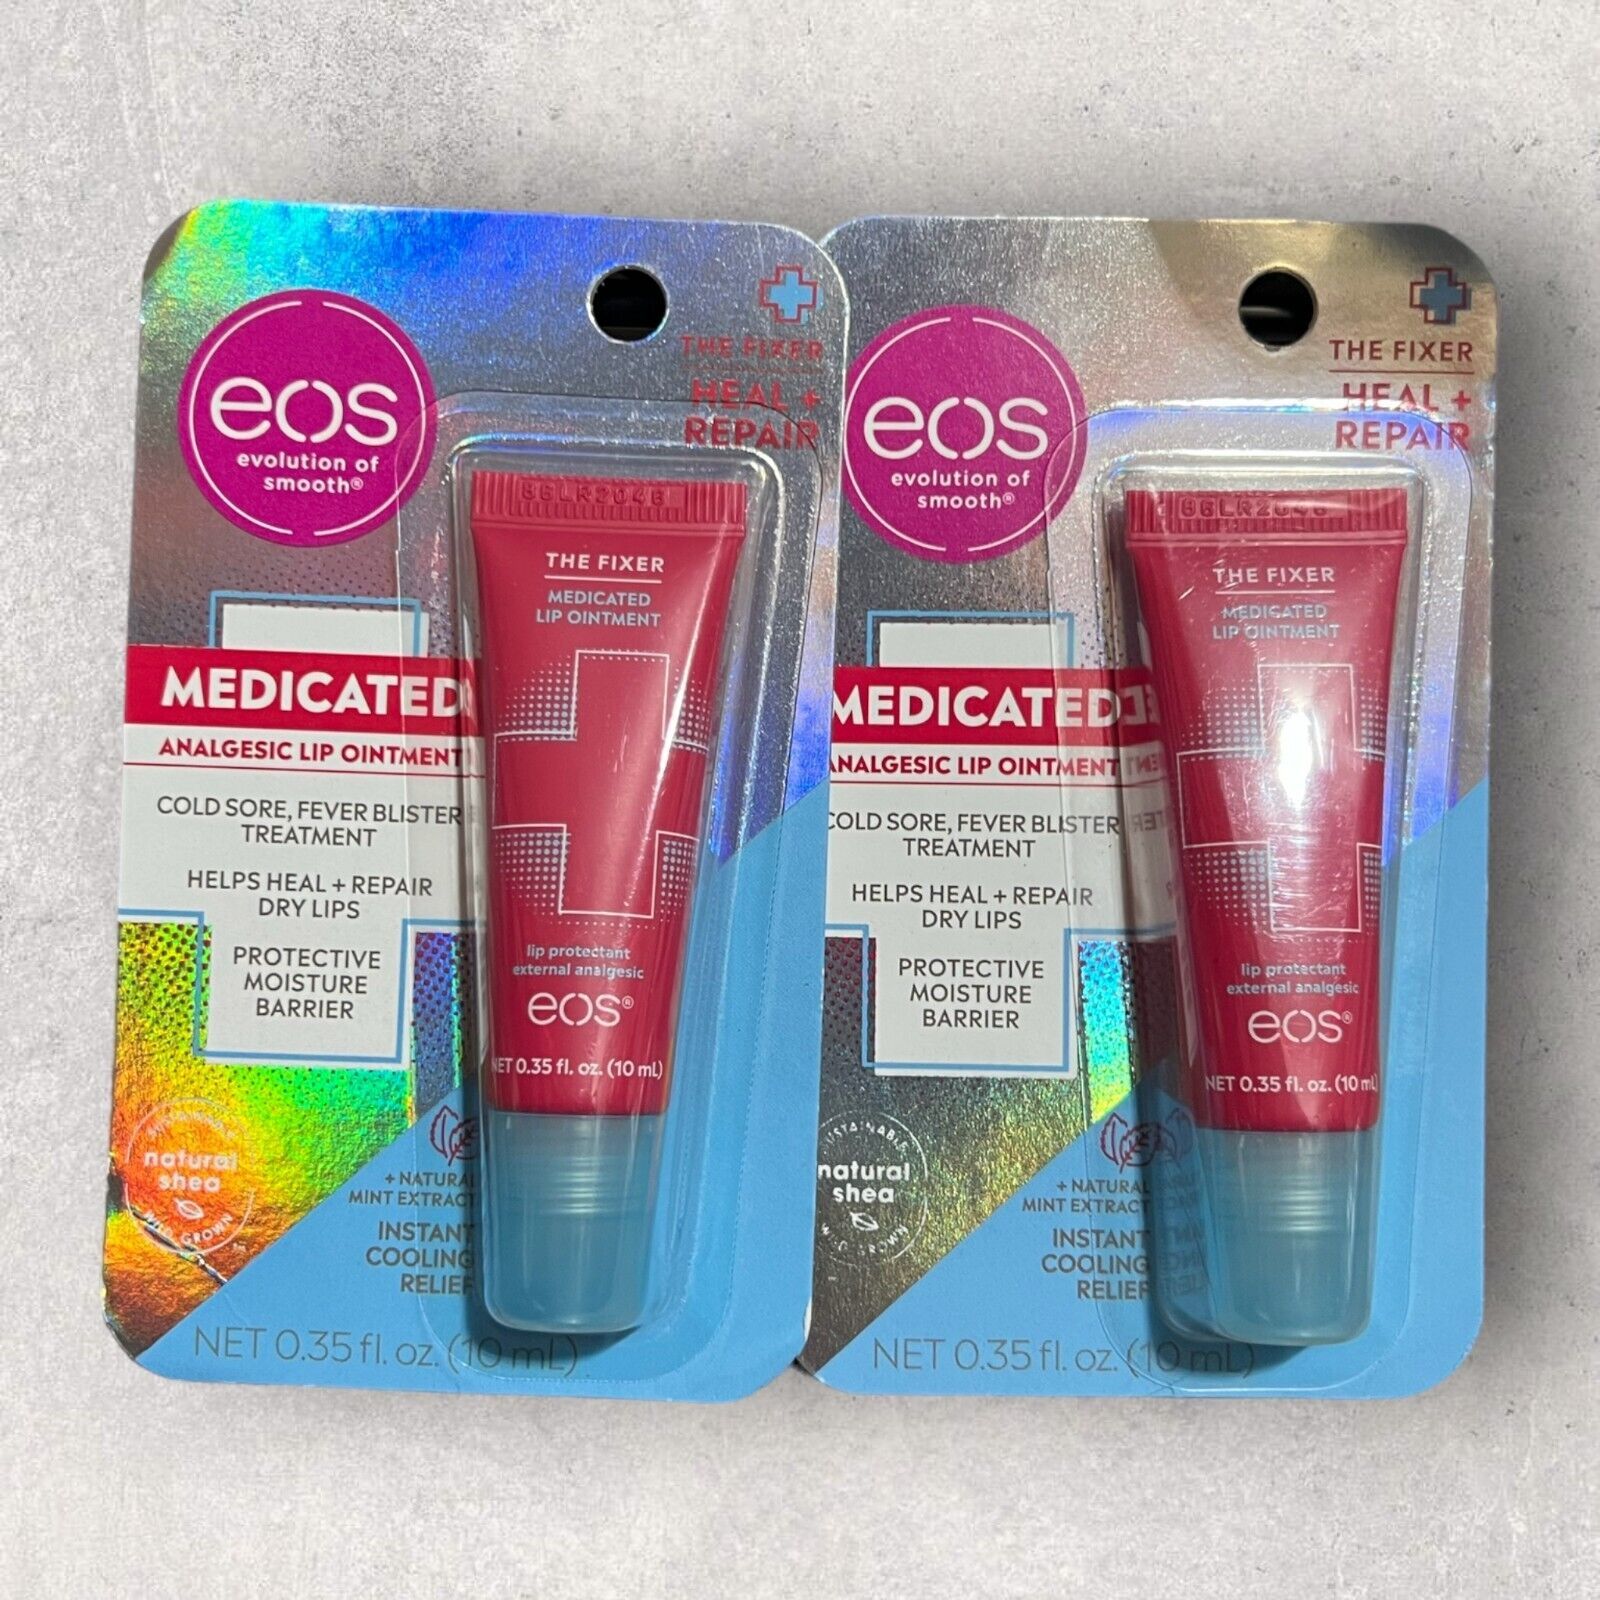 2 x EOS Analgesic Lip Ointment THE FIXER, Natural Mint Extract, 0.35 fl oz - $39.59